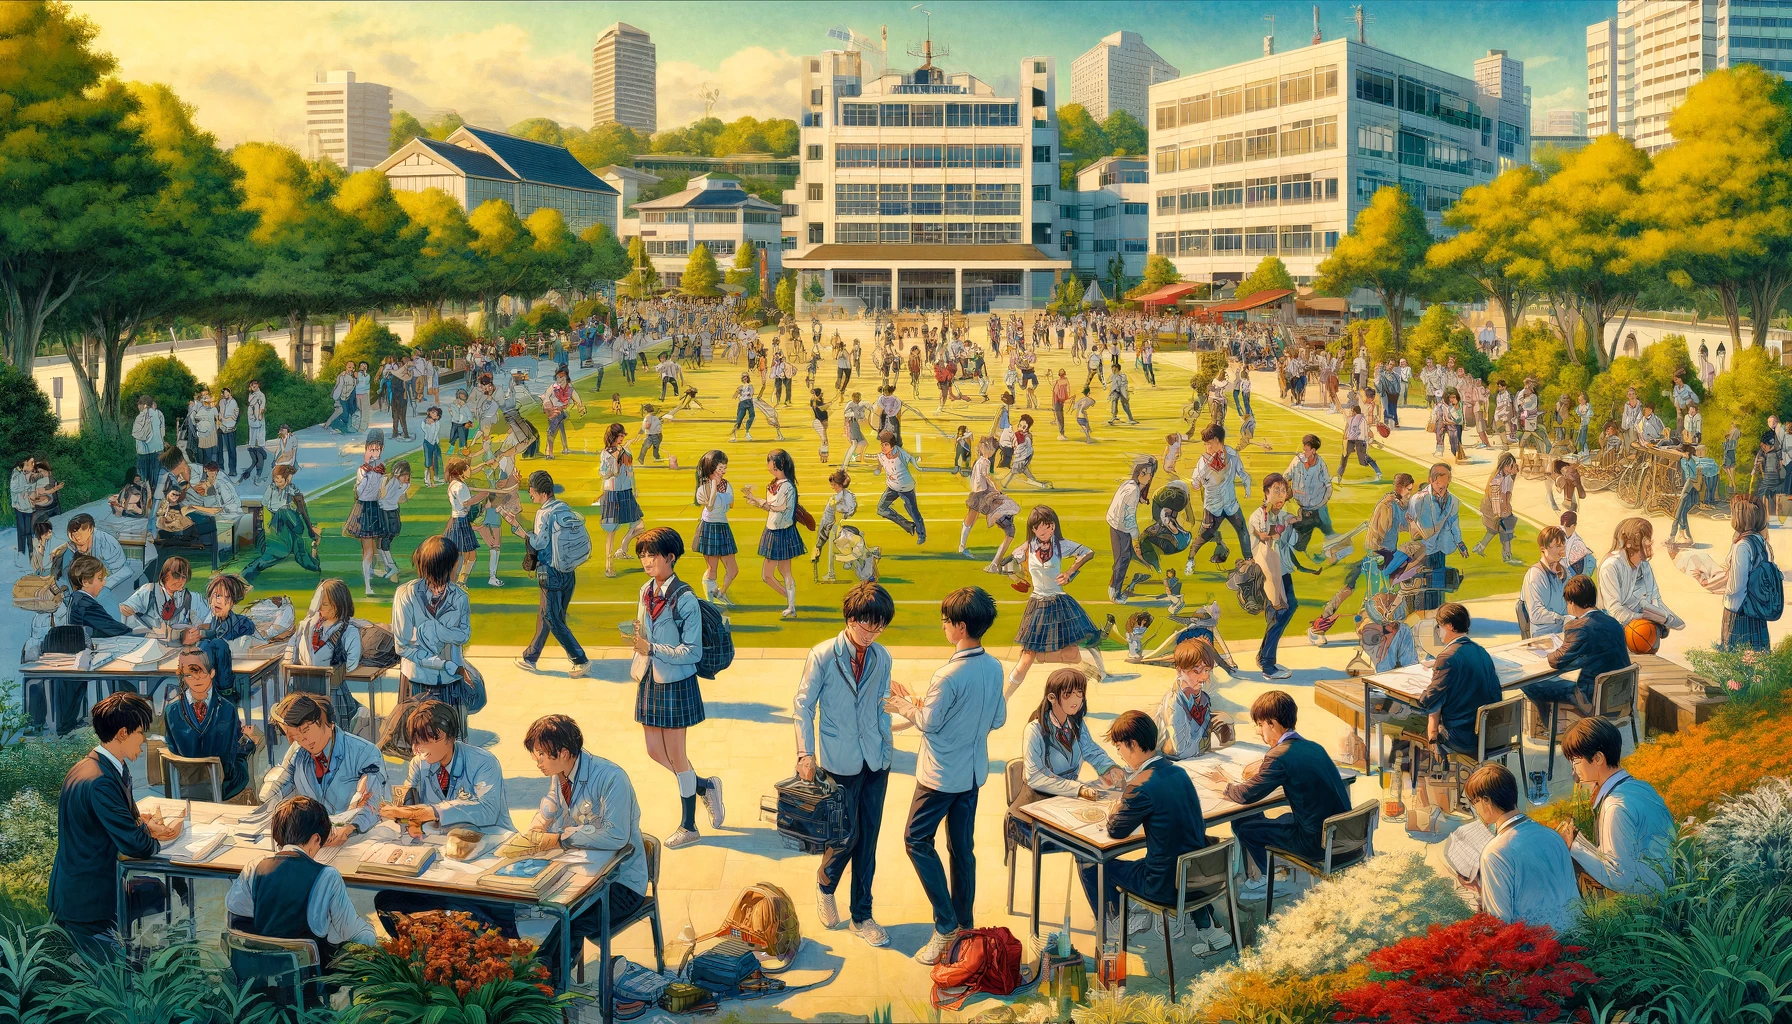 A lively and bustling high school campus scene depicting the popularity of Mita High School in Japan. The image features a diverse group of students of various Asian descents, in school uniforms, actively participating in a variety of outdoor activities. The scene includes students engaged in discussions, sports, and studying in outdoor settings, with a backdrop of modern and traditional school buildings. The landscape is lush with trees and flowers, symbolizing a vibrant school life. The atmosphere is energetic and joyful, reflecting a highly regarded and active educational environment.